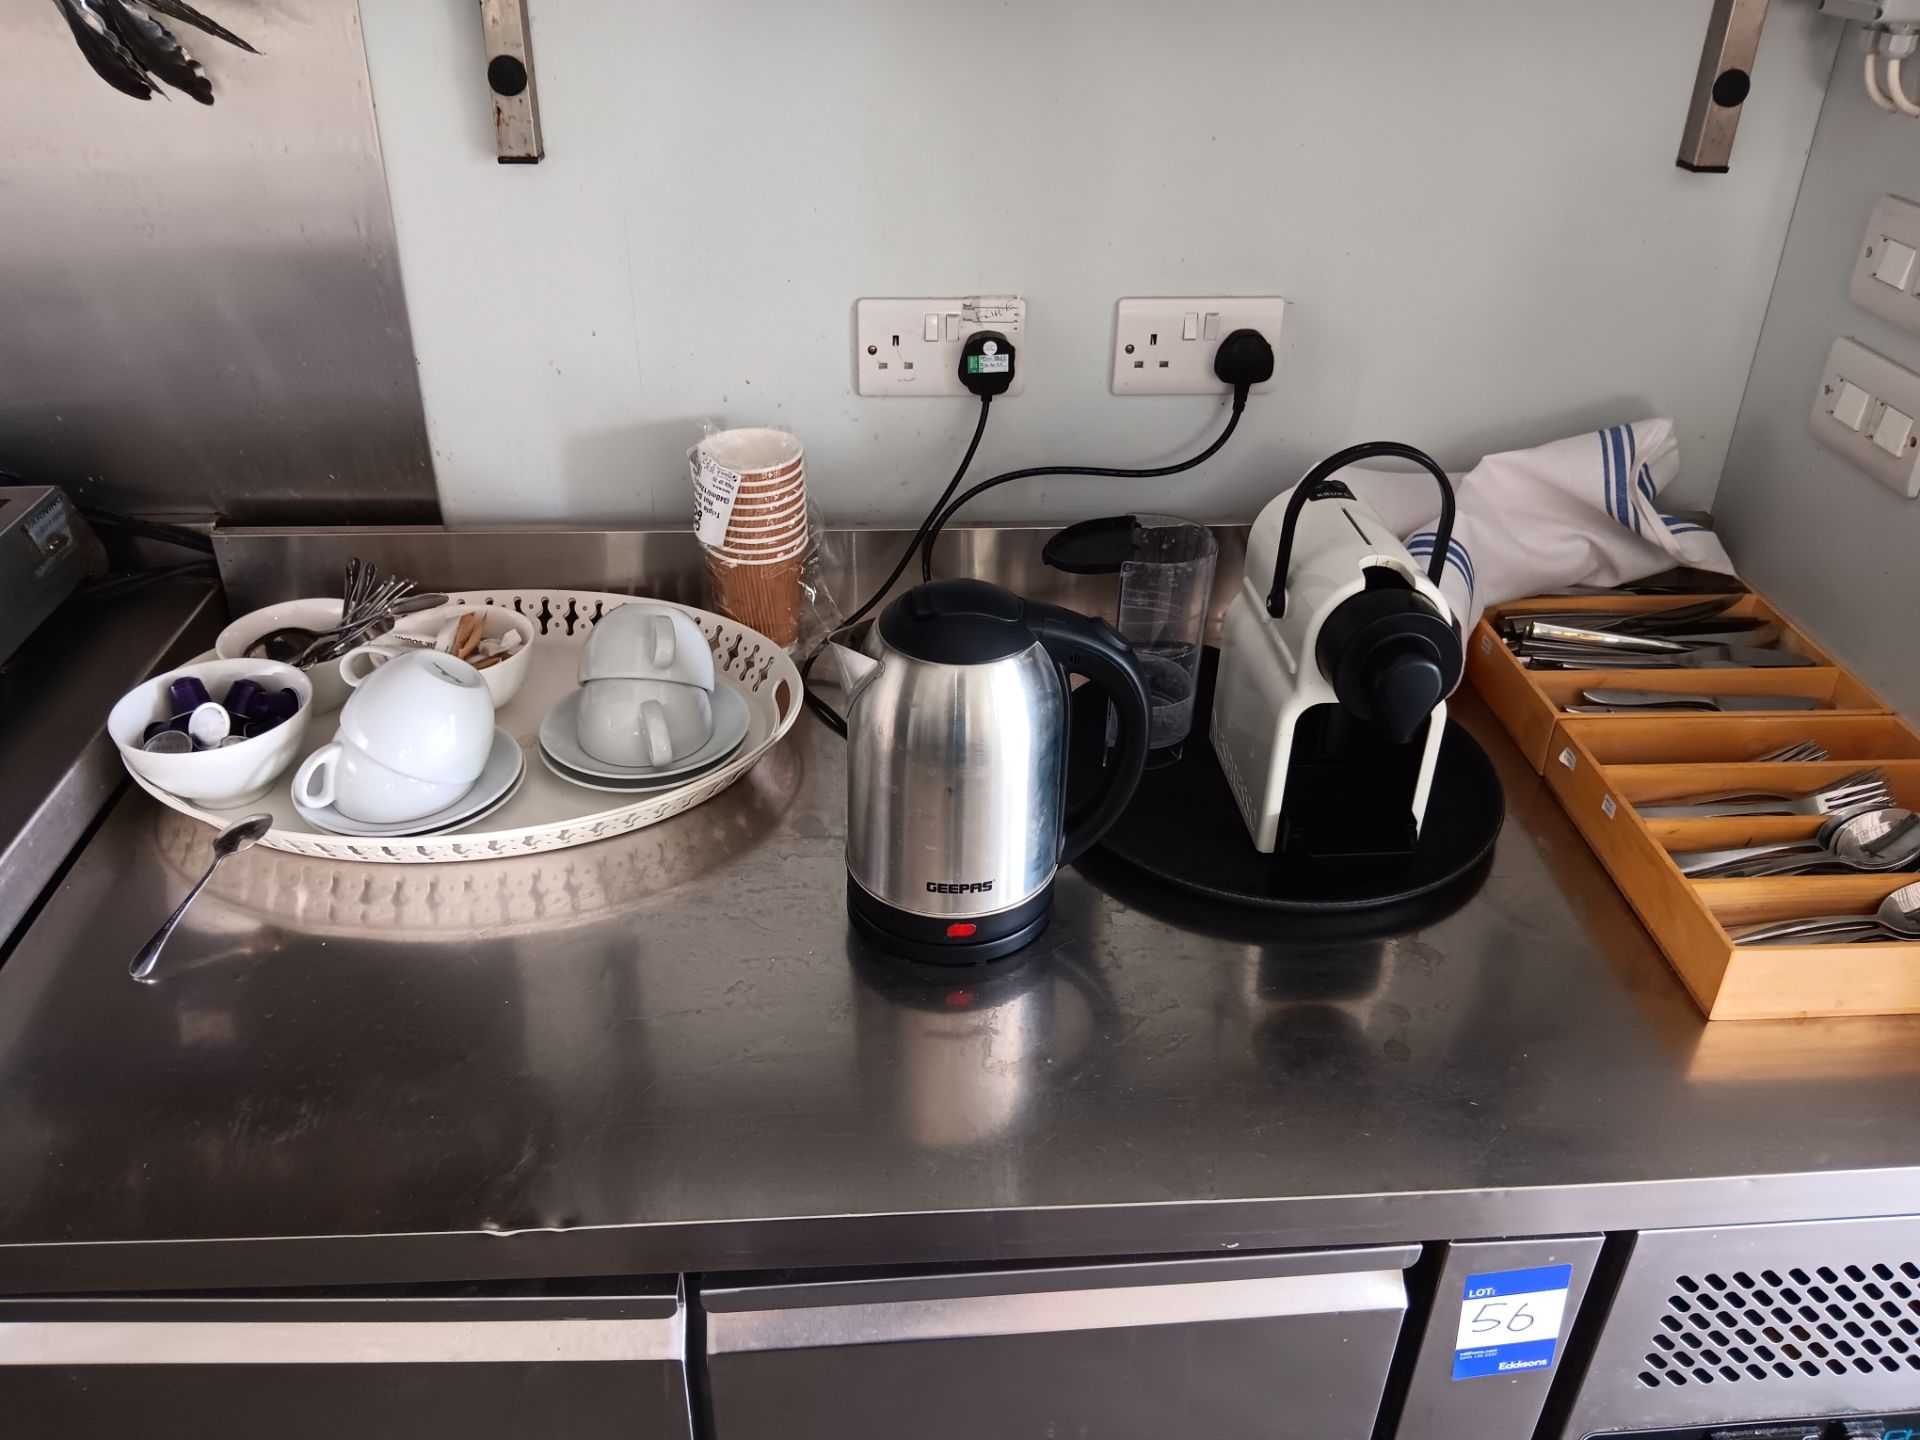 Kitchen sundries to include kettle, stainless steel cutlery and various cooking utensils